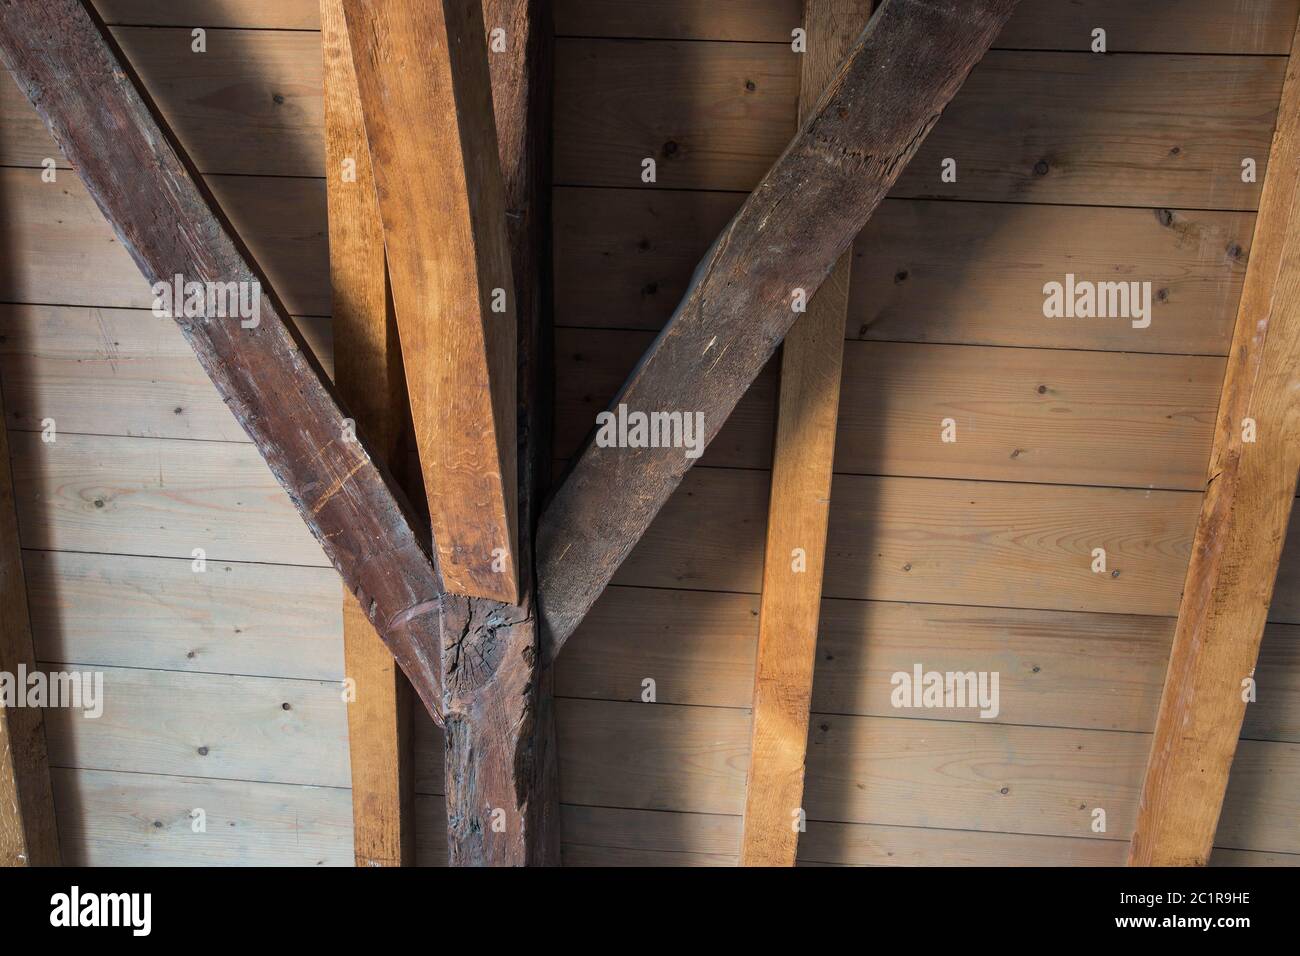 Interior view of a wooden roof structure, close-up wood texture Stock Photo